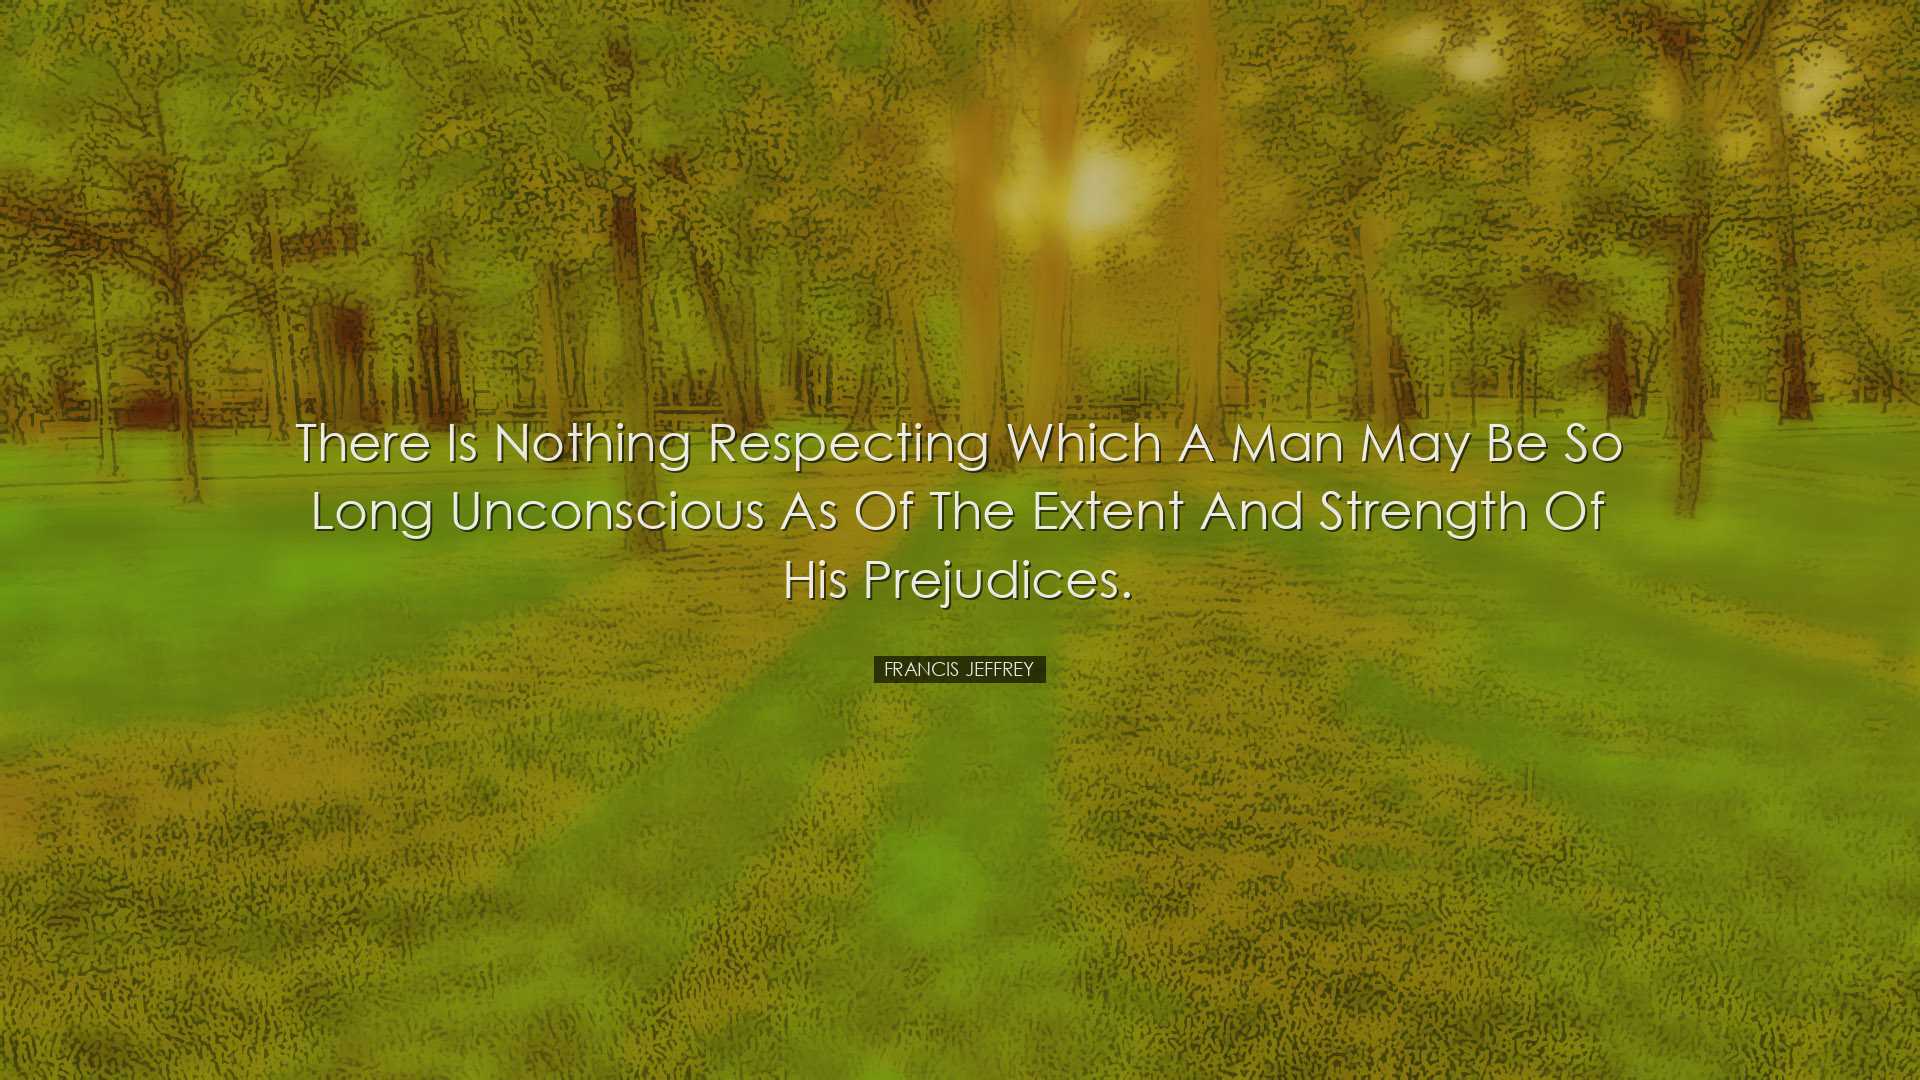 There is nothing respecting which a man may be so long unconscious